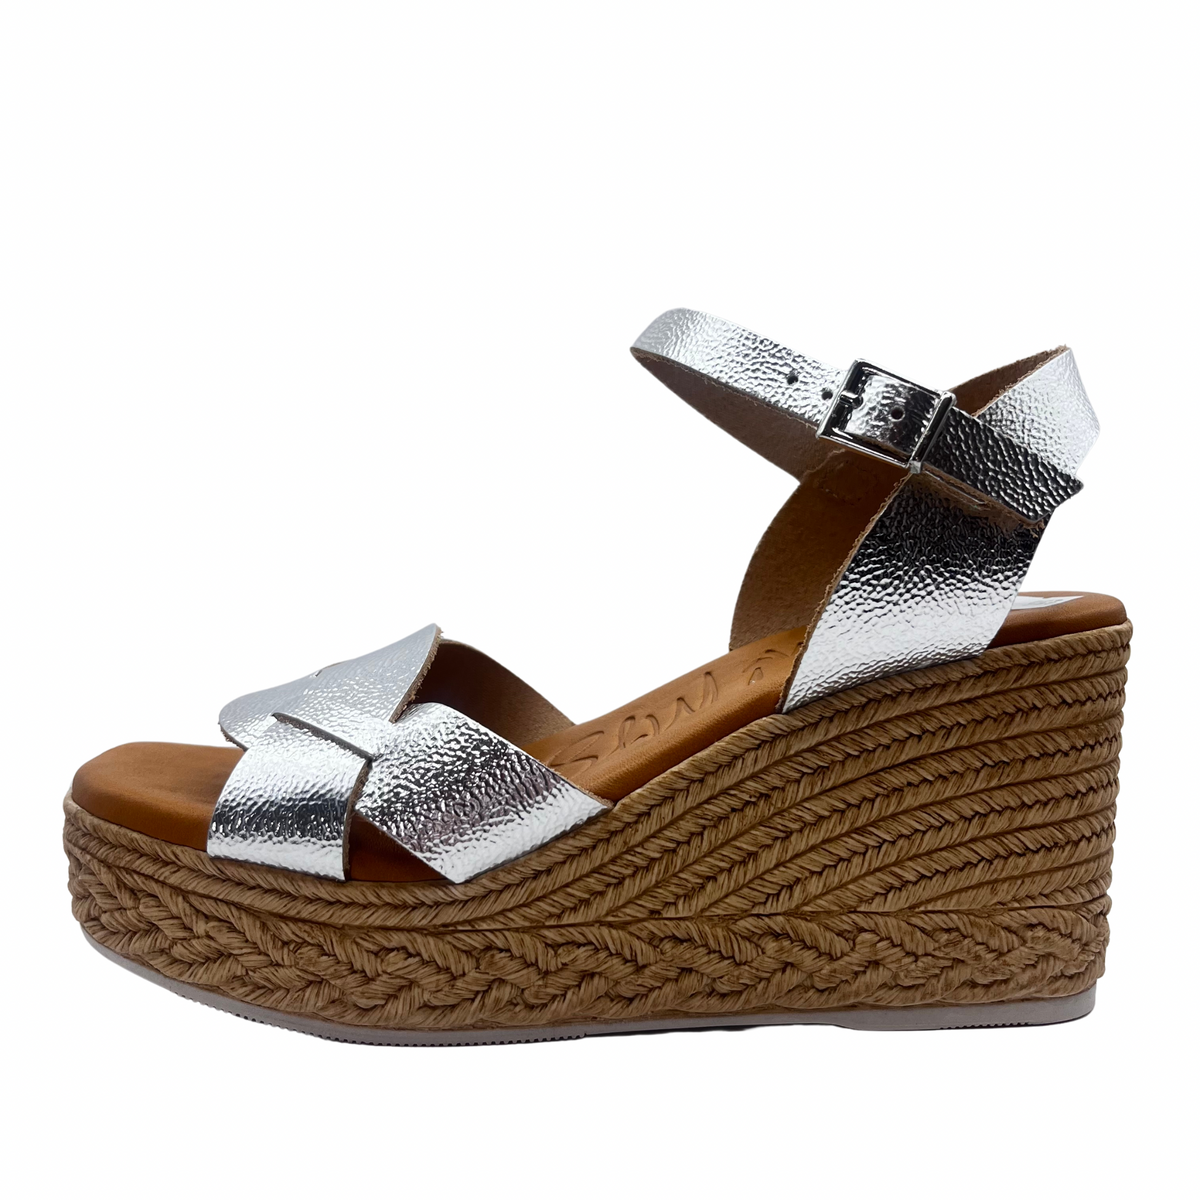 Oh My Sandals Woven Wedge Leather Silver Sandal